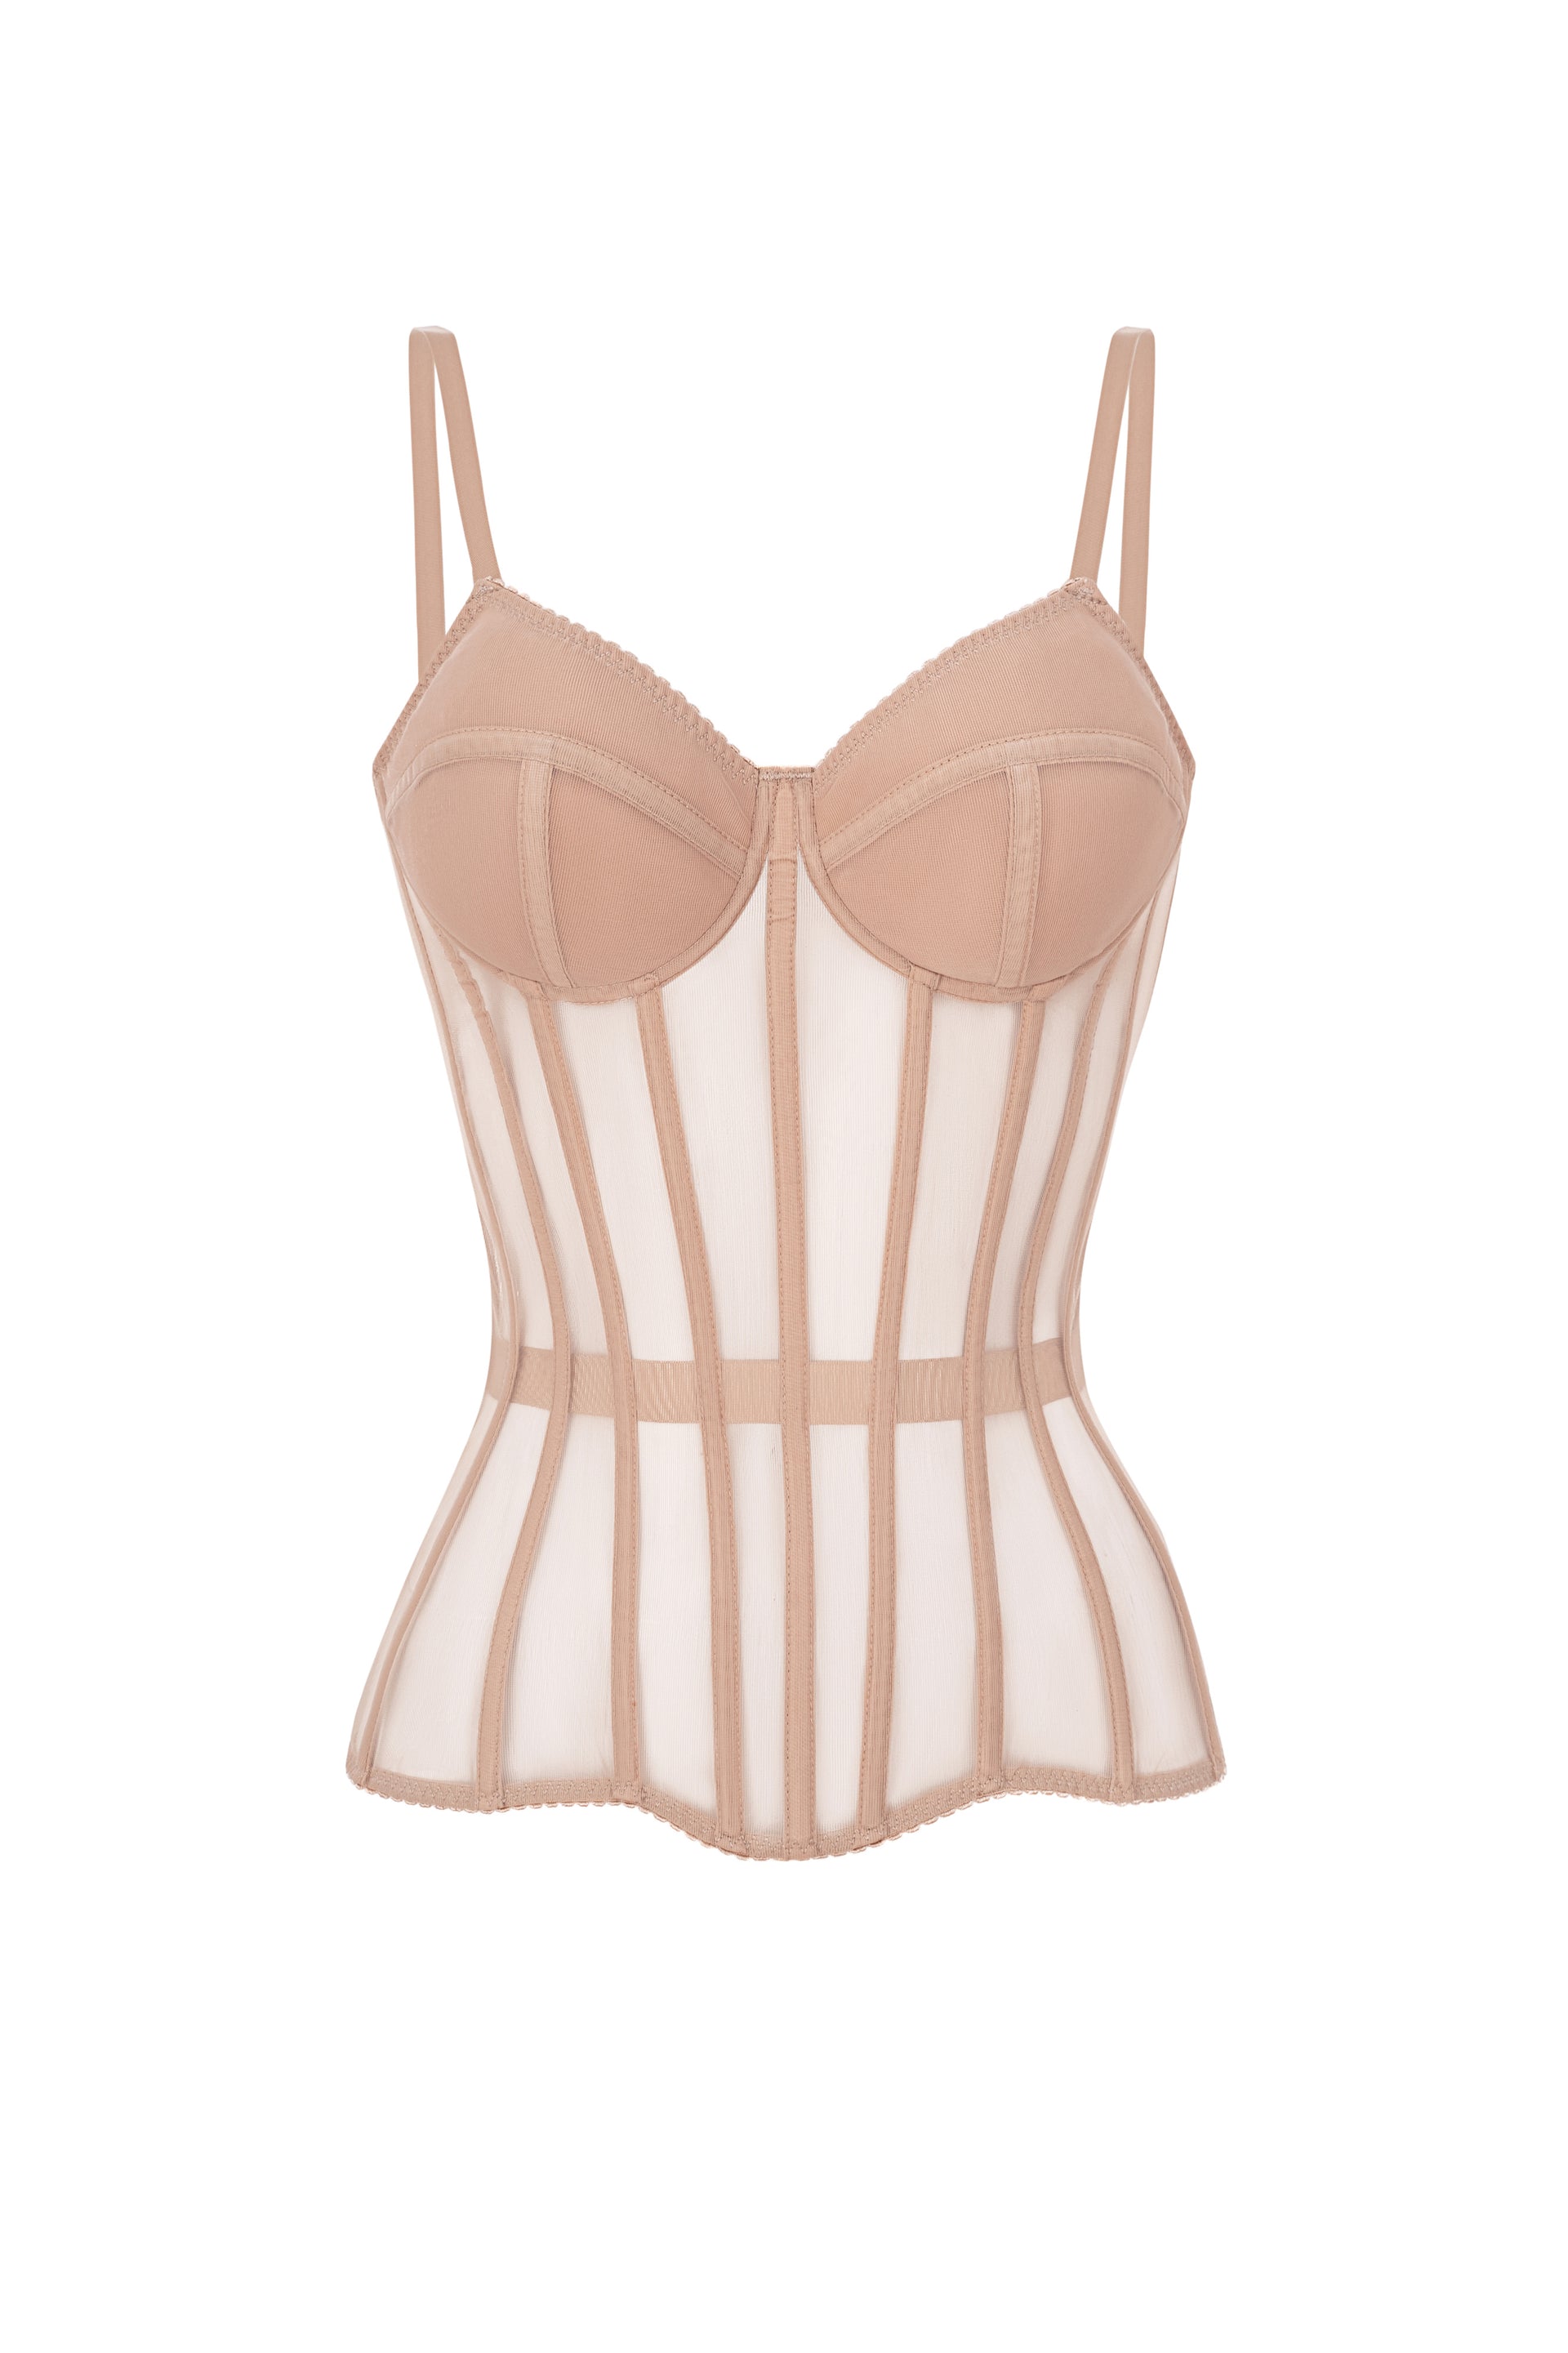 Beige corset with transparent cups